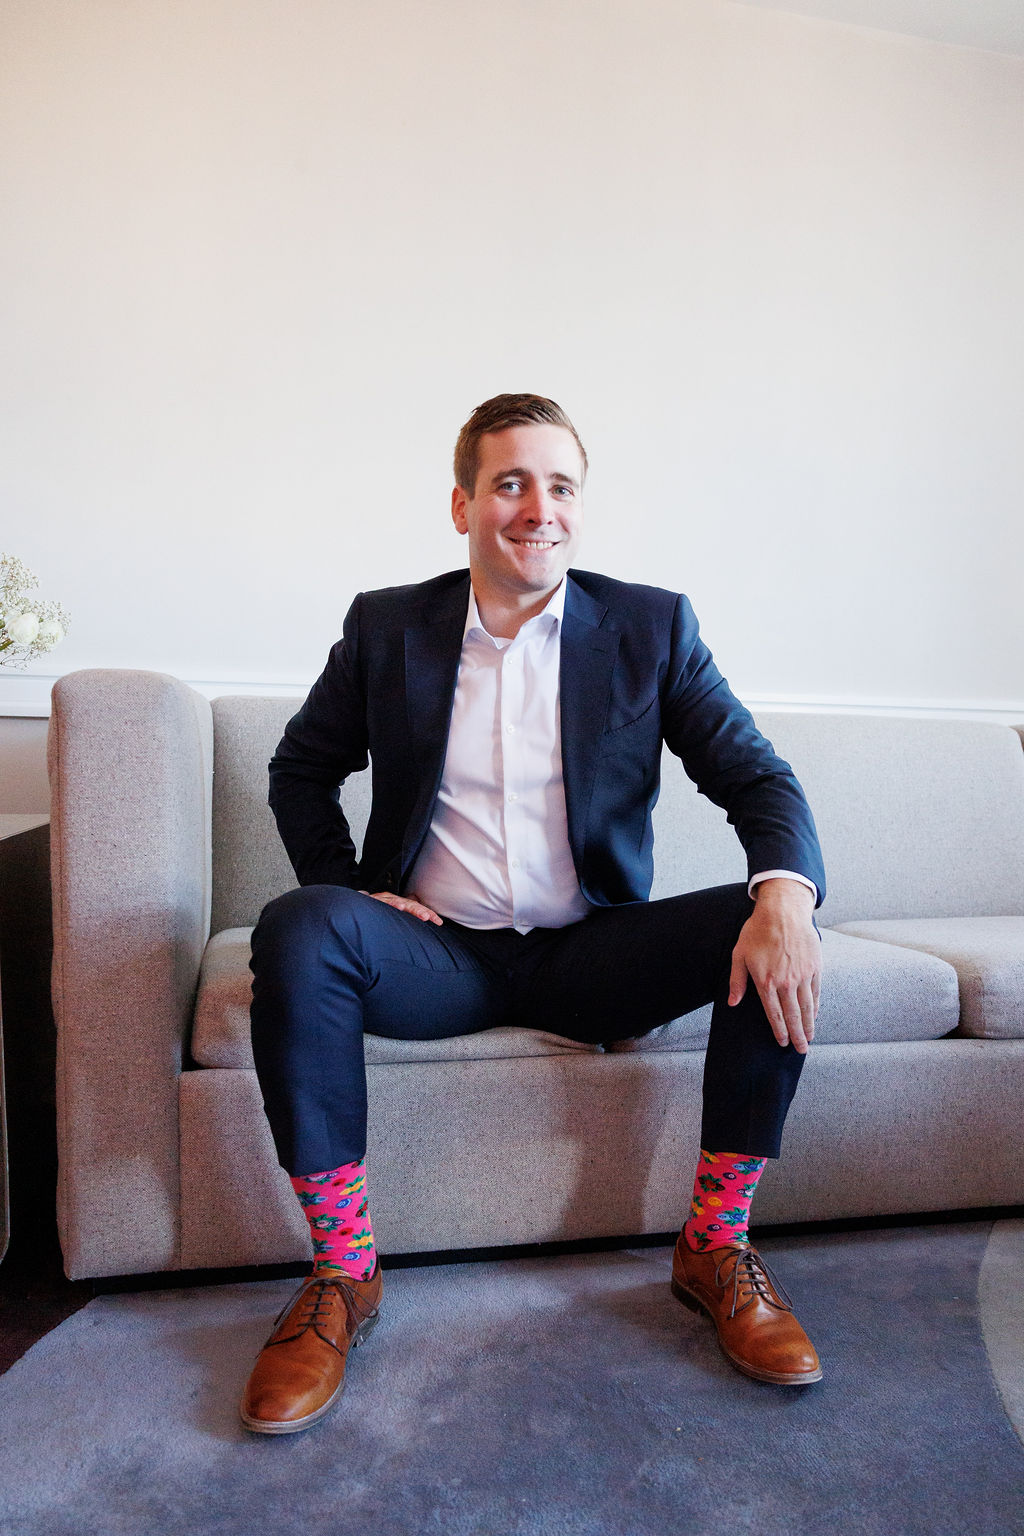 A groom shows off his fun pink socks while sitting on a couch